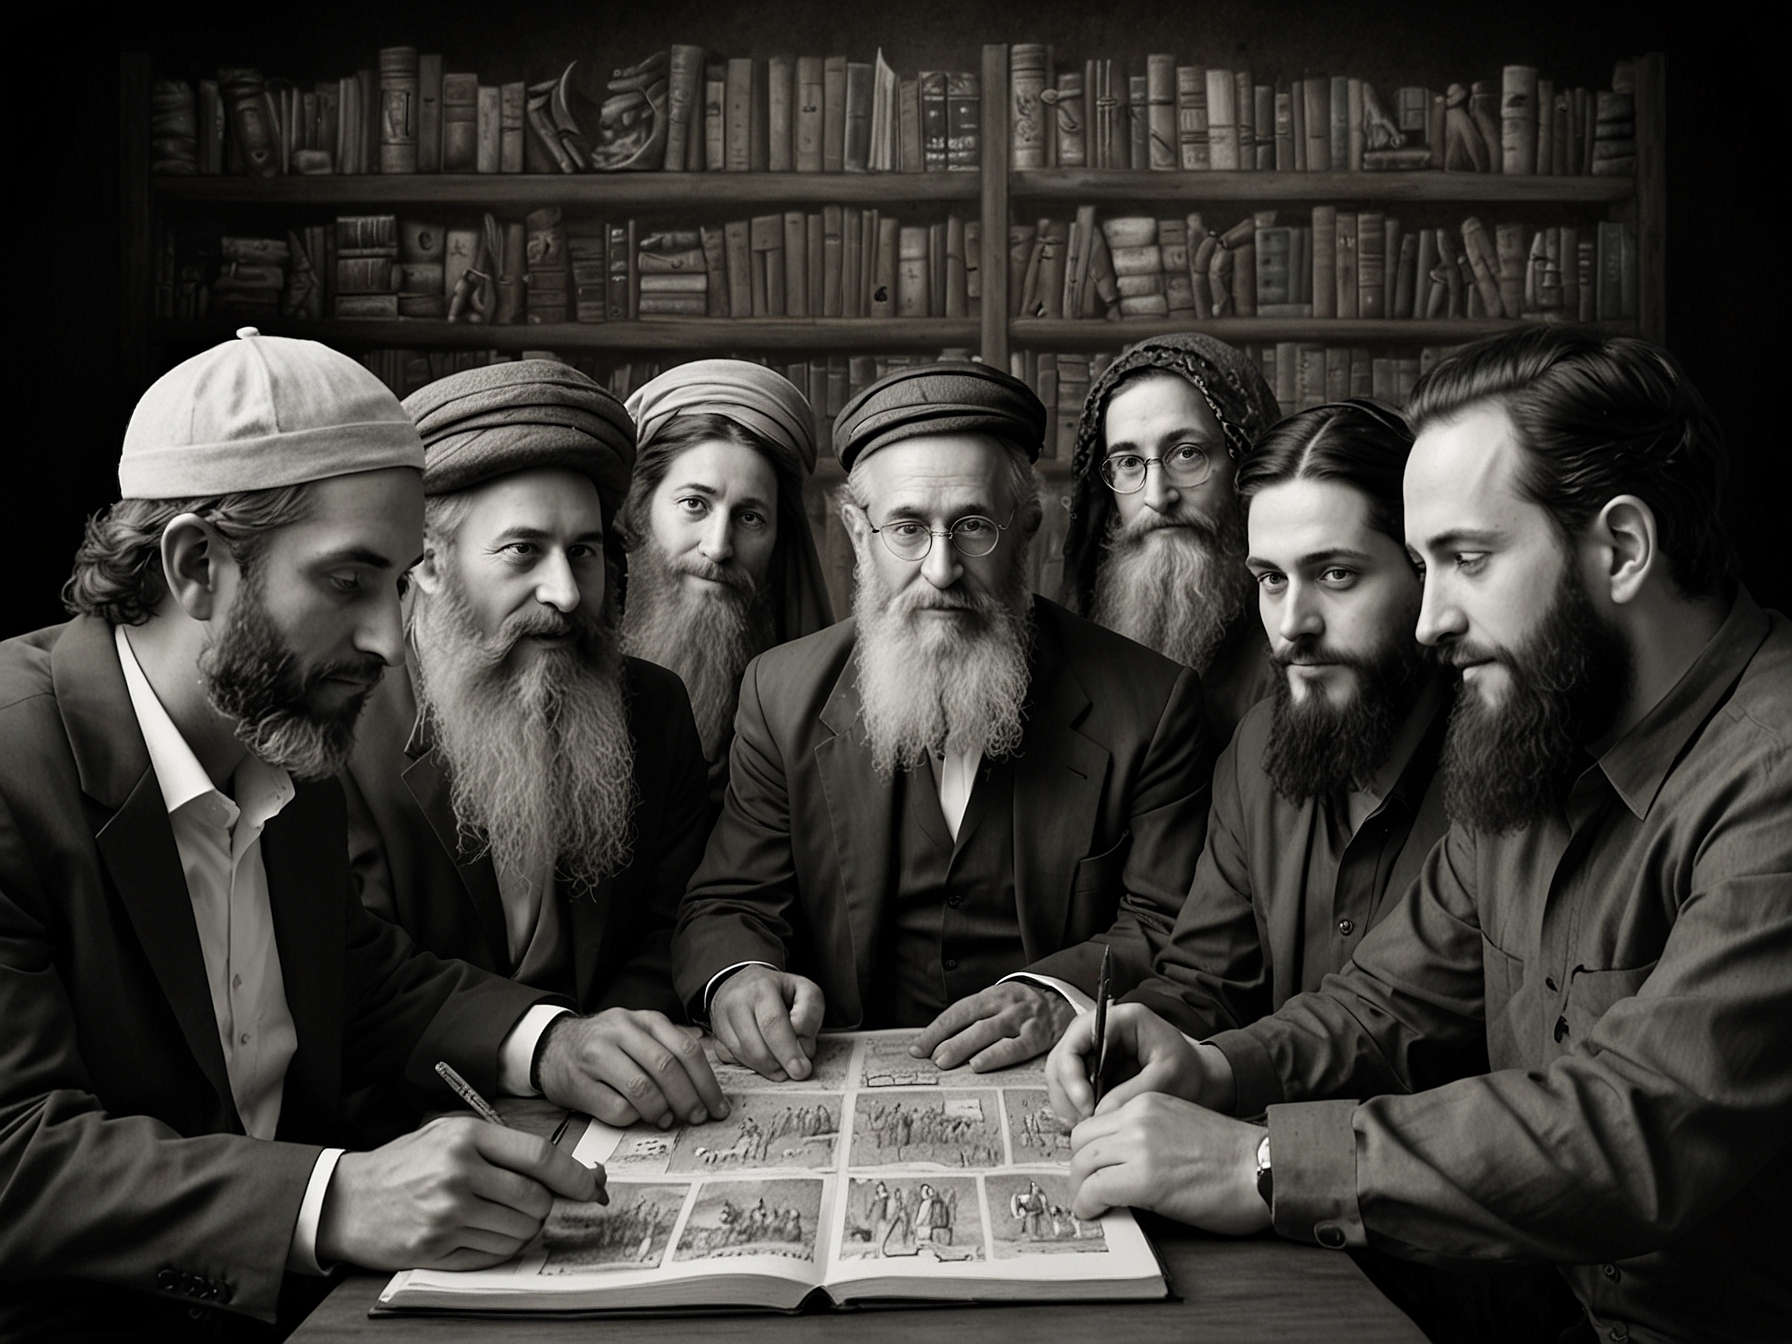 An image showing diverse Jewish groups, including Ashkenazi, Sephardic, Mizrahi, and Modern Orthodox Jews, each engaged in different forms of Torah study, symbolizing the article's theme of inclusivity.